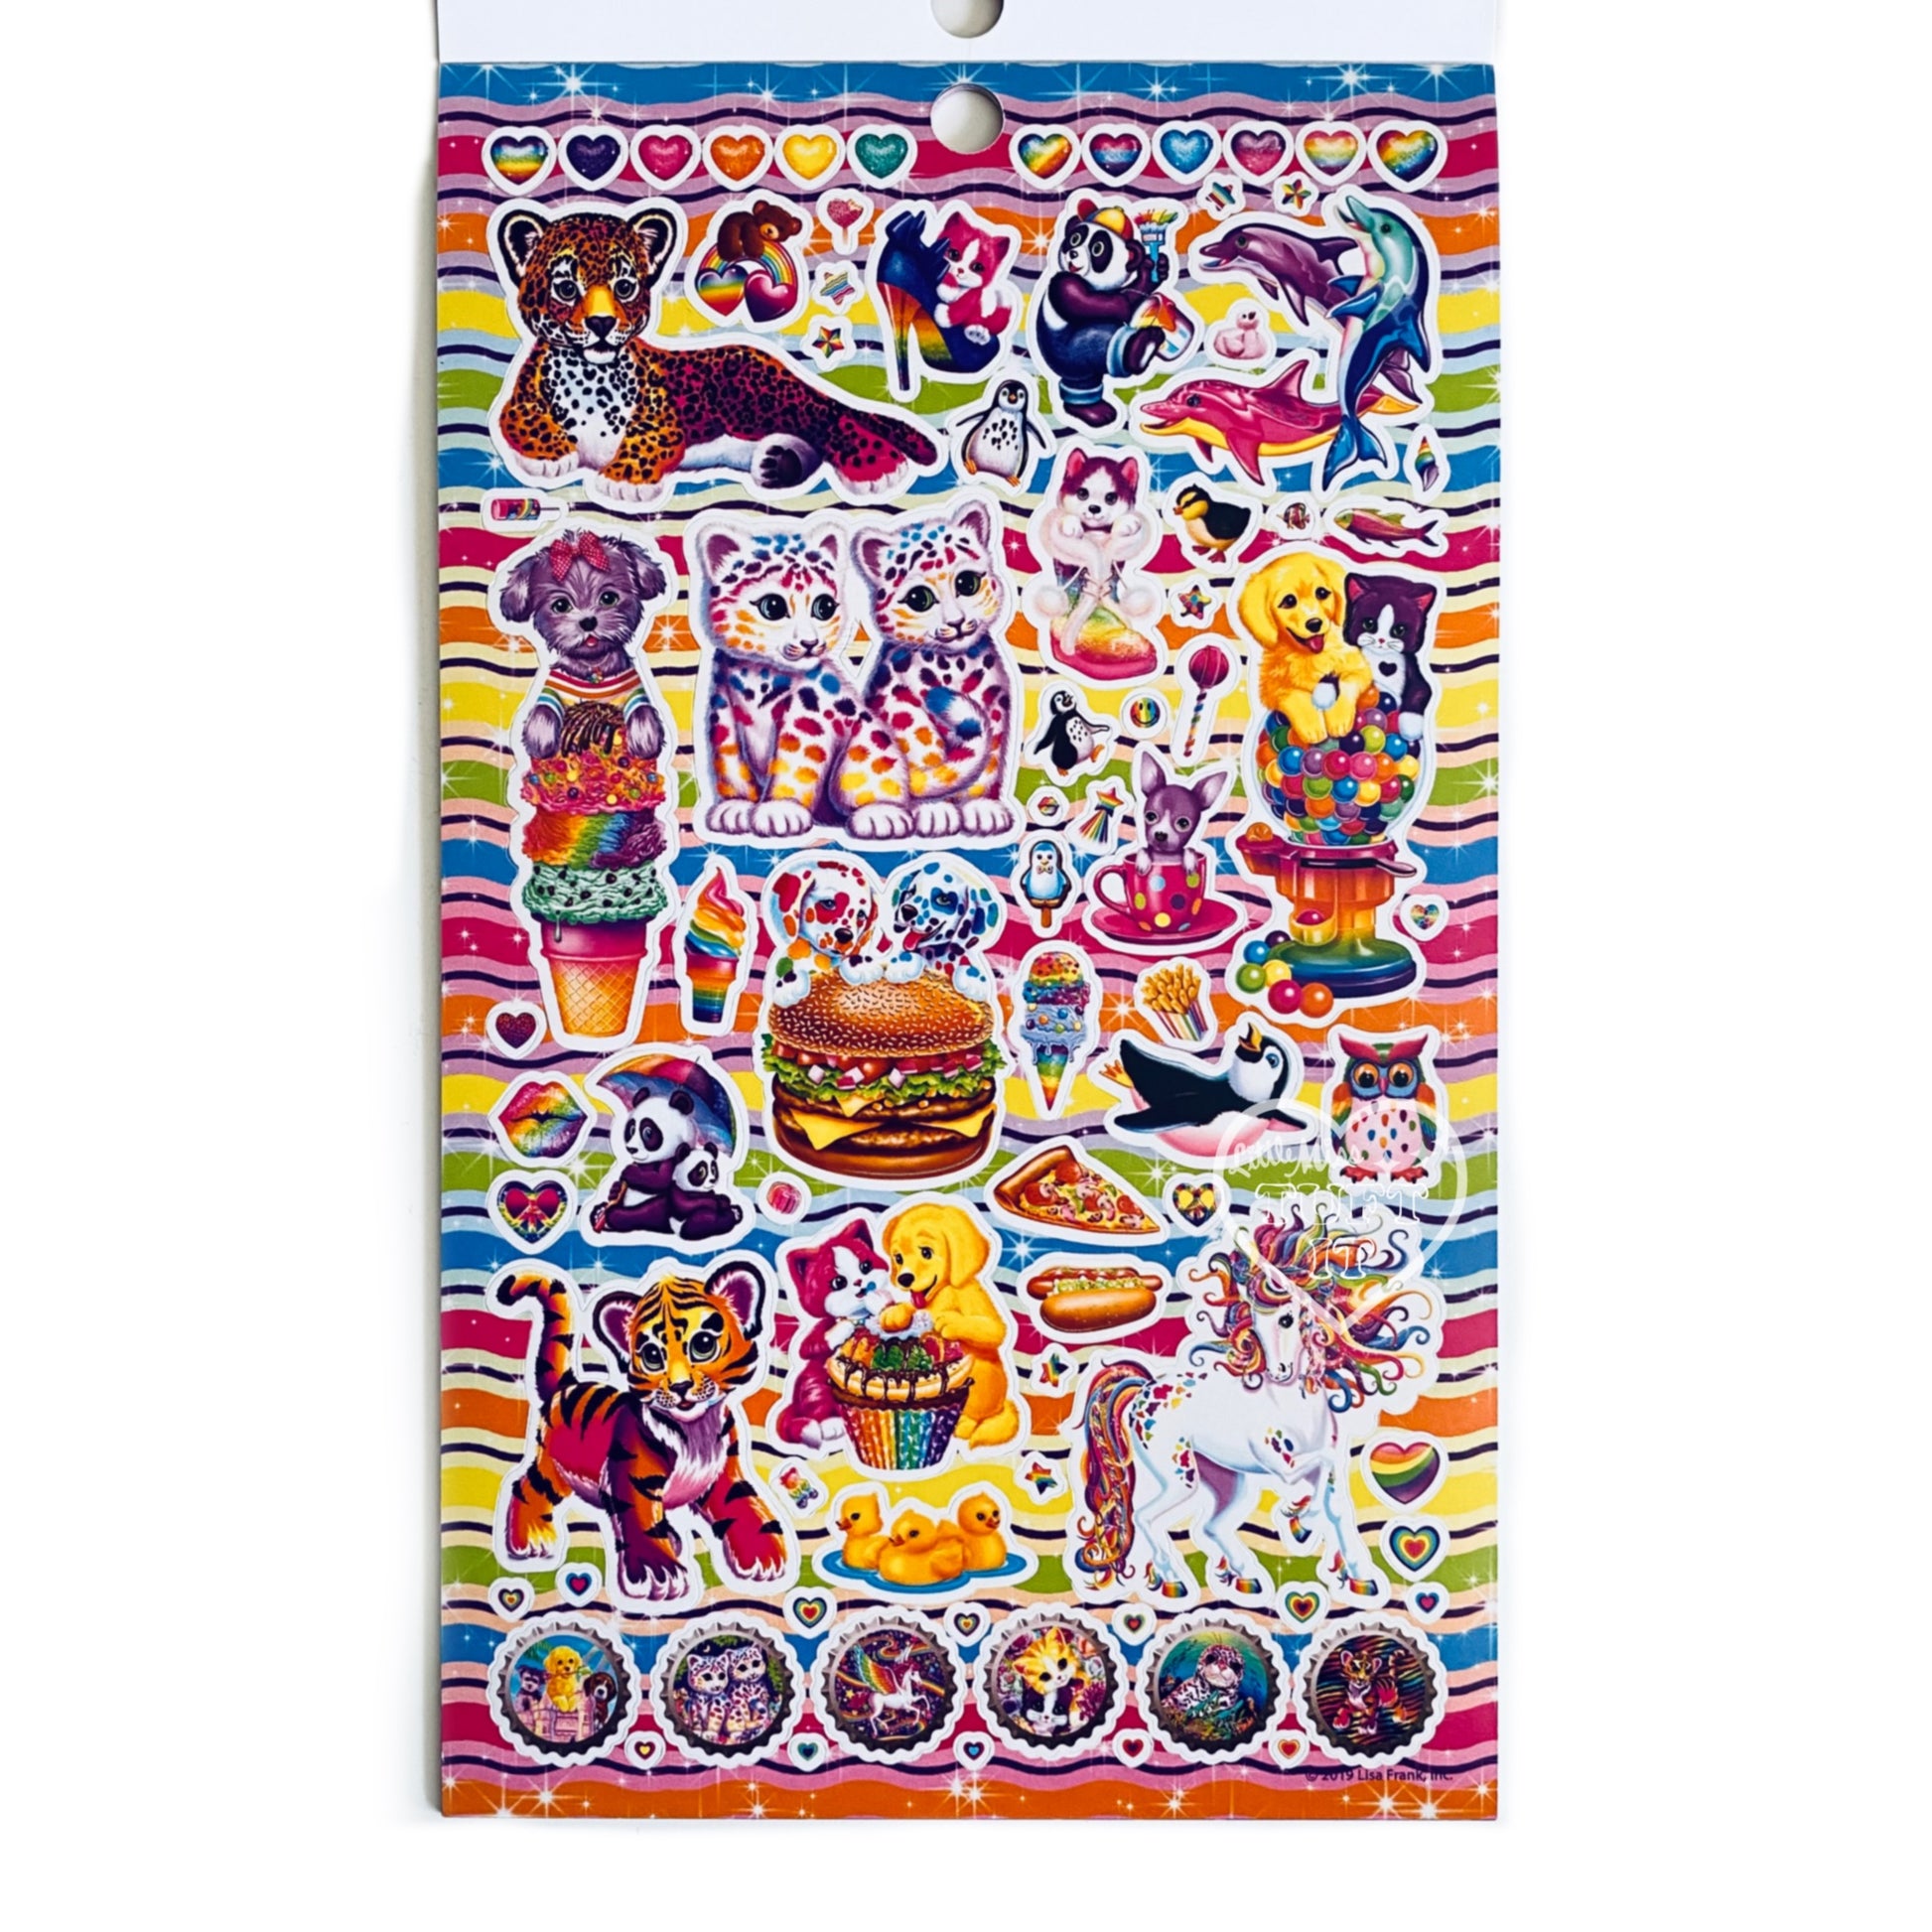 Lisa Frank Sticker Pad - Over 600 Stickers